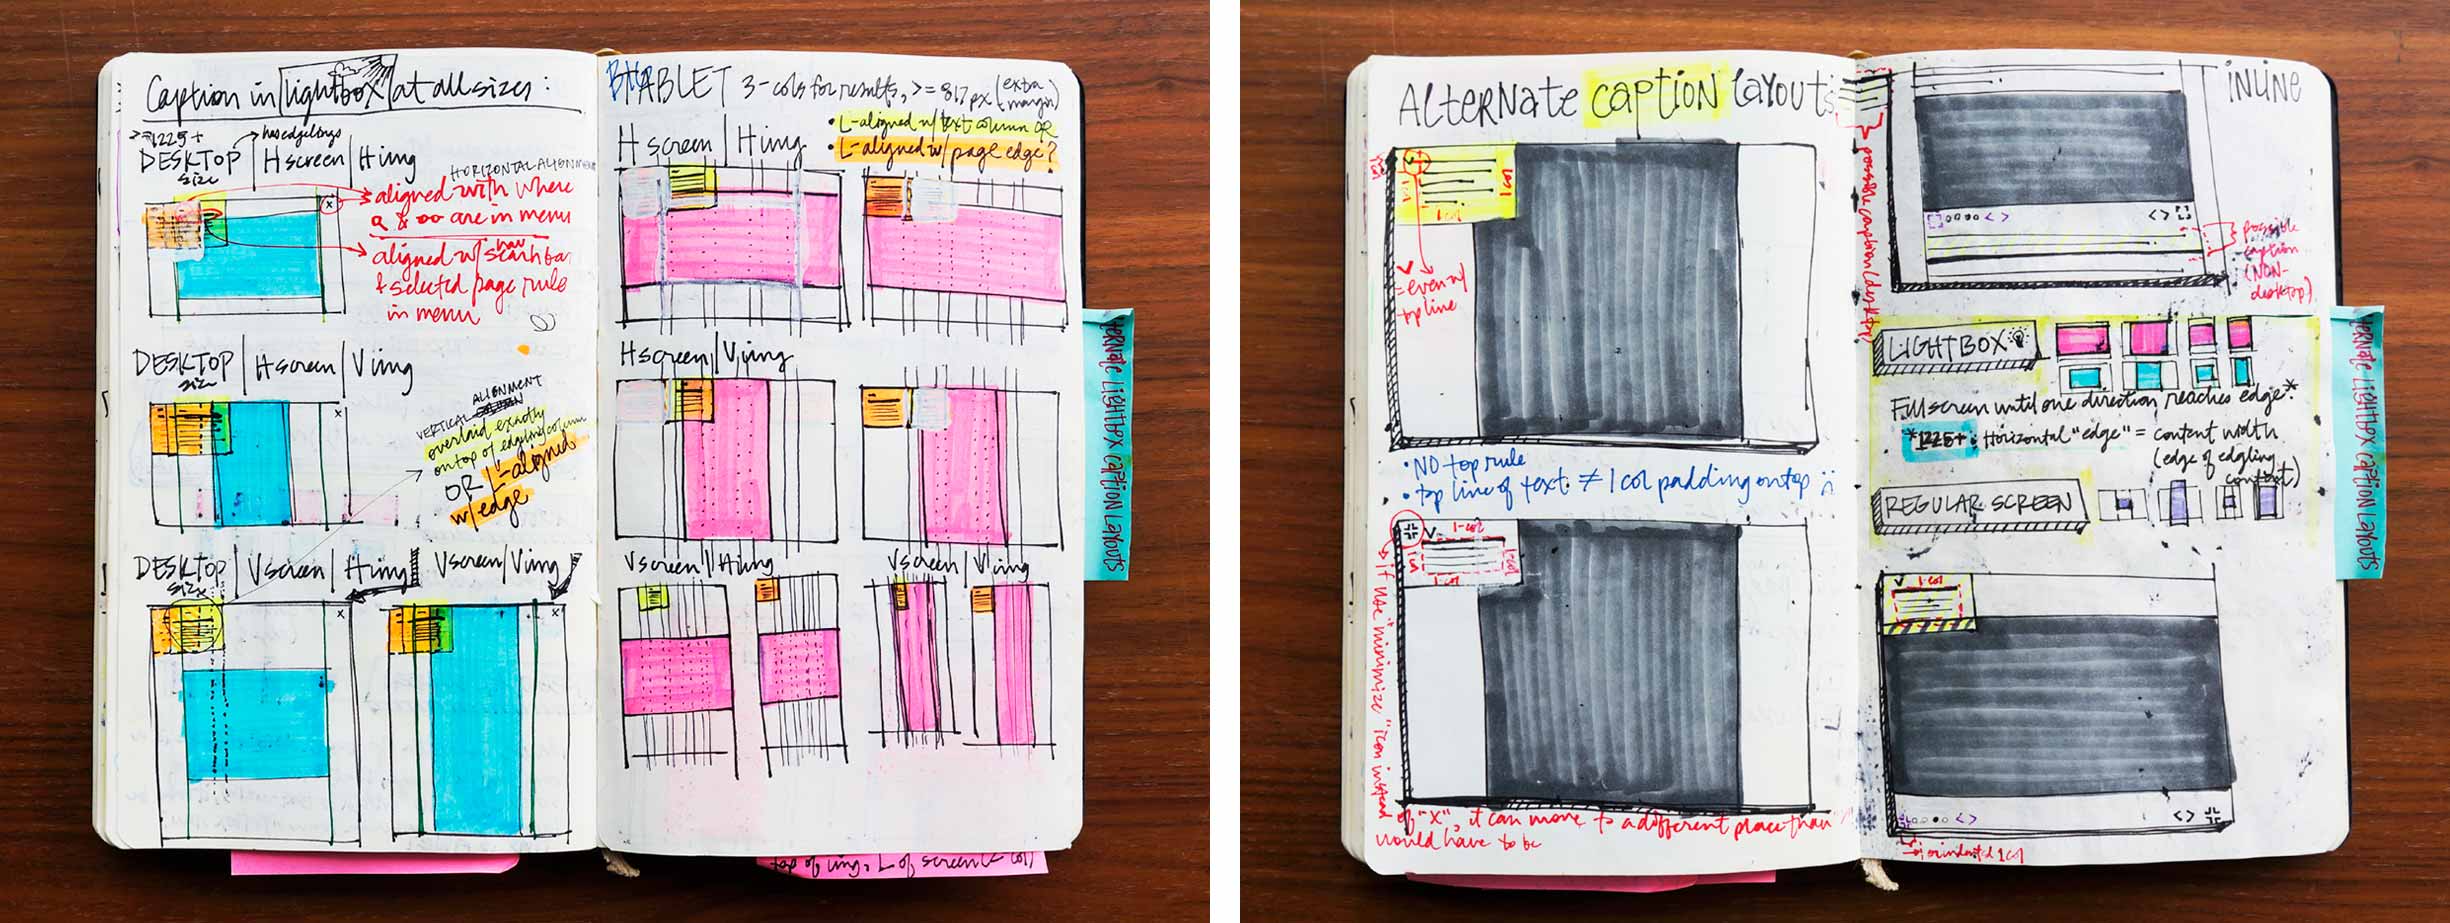 Notebook pages with wireframe sketches explore possible permutations of image and caption layouts.